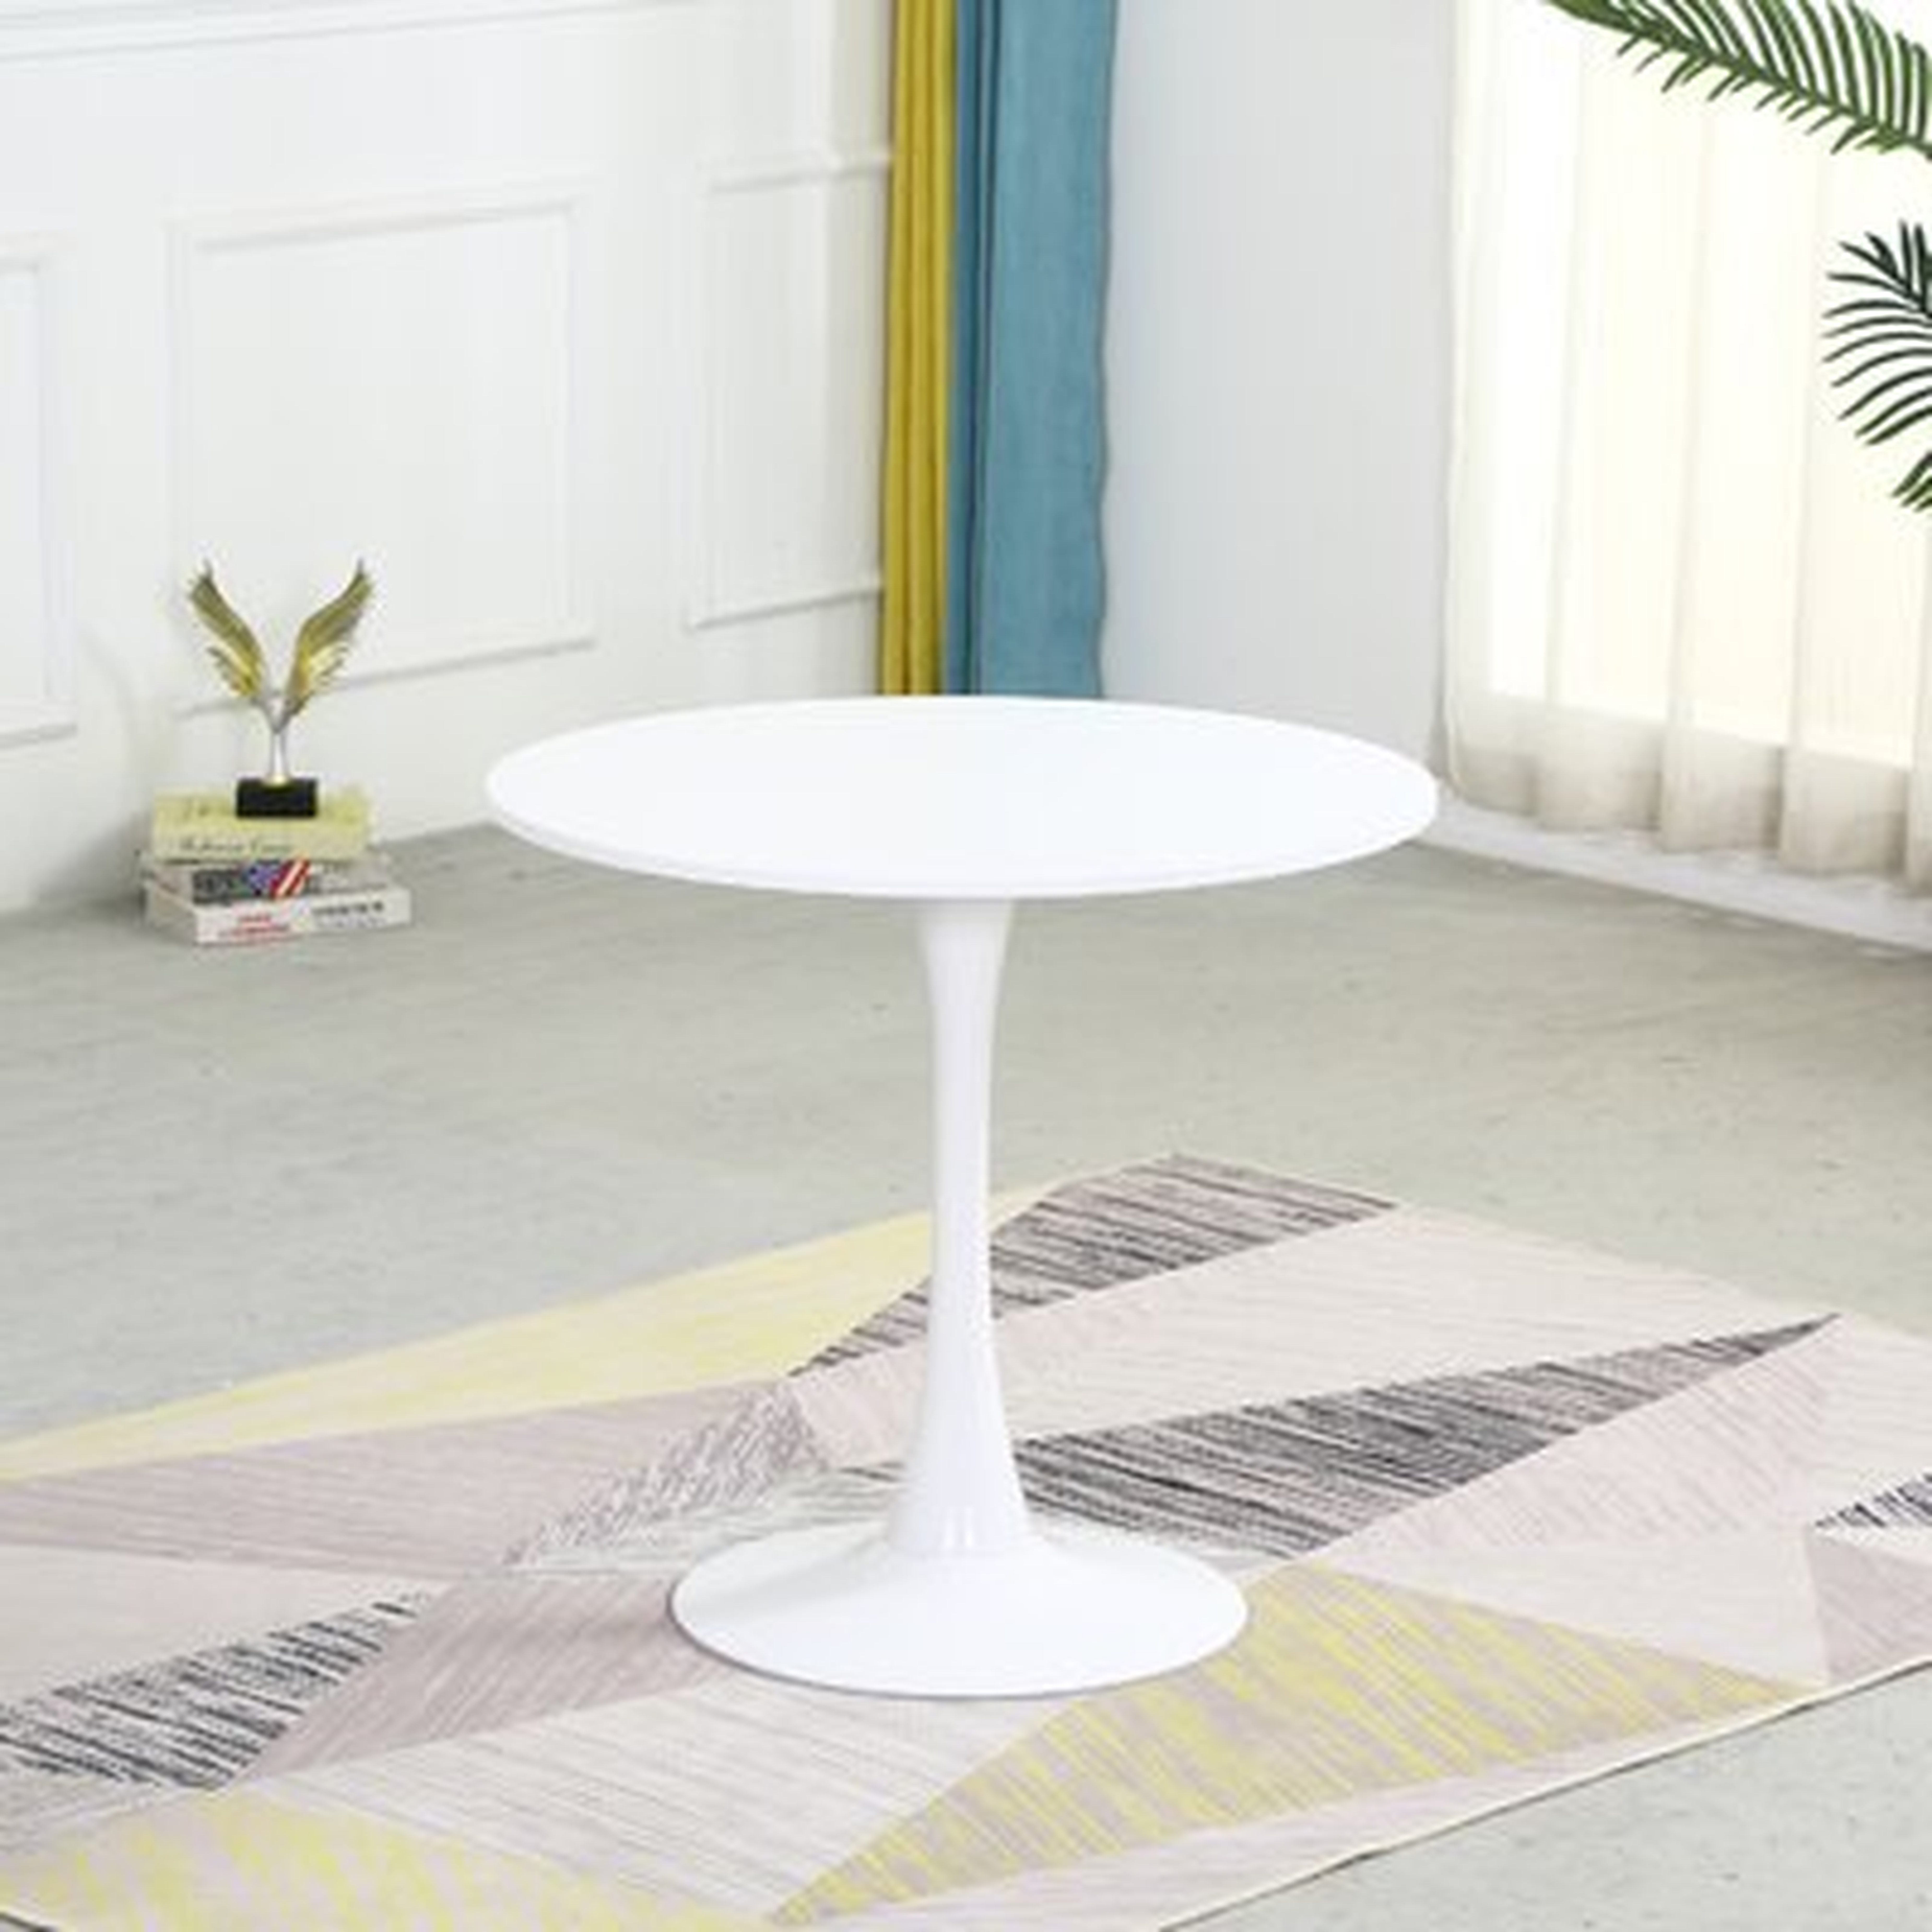 31.5" White Round Dining Table - Modern Dining Room Table With Mdf Table Top And Metal Pedestal Base For Kitchen And Dining Room Leisure Table For 2 Or 4 Person - Wayfair